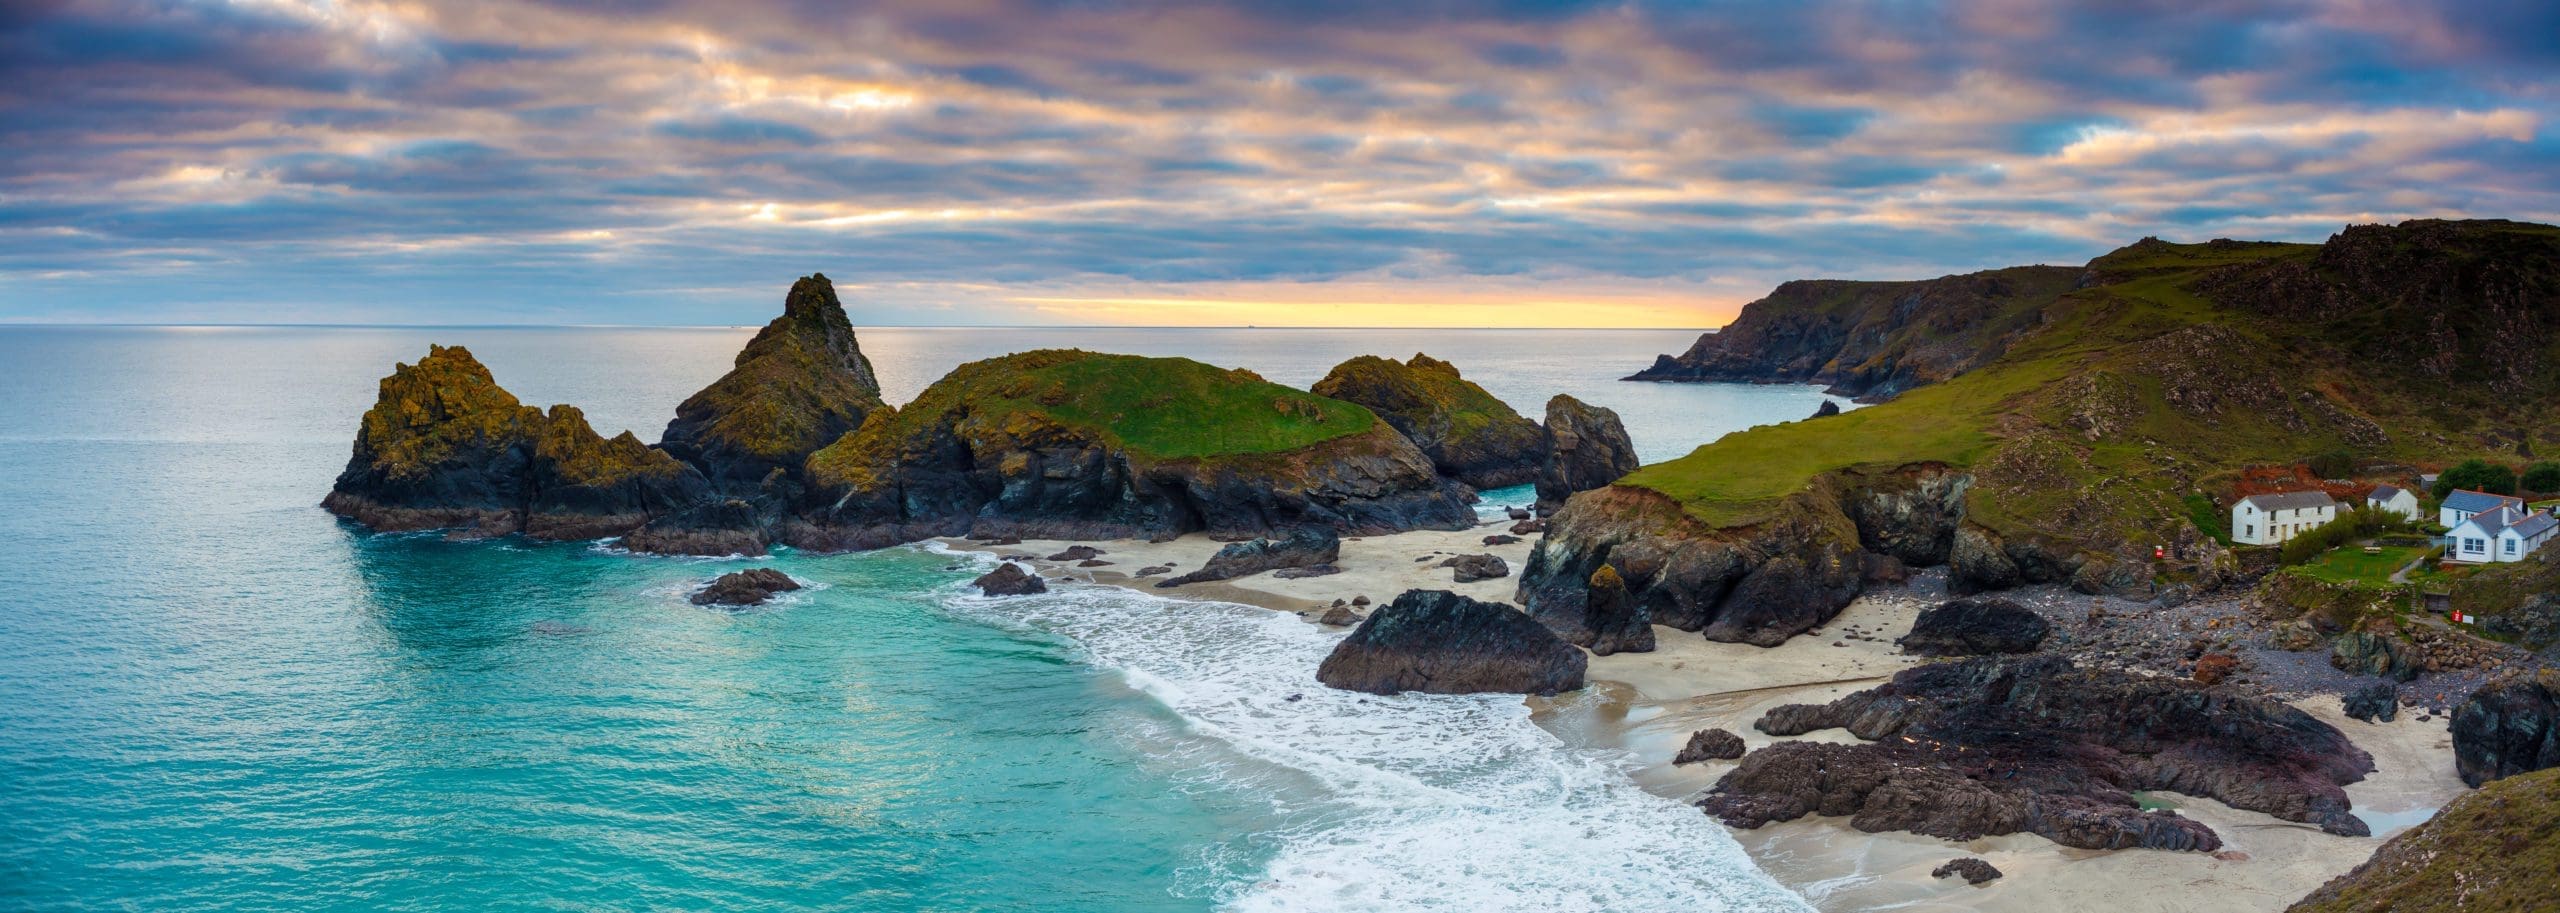 15 Of The Best Beaches To Visit In Cornwall This Summer